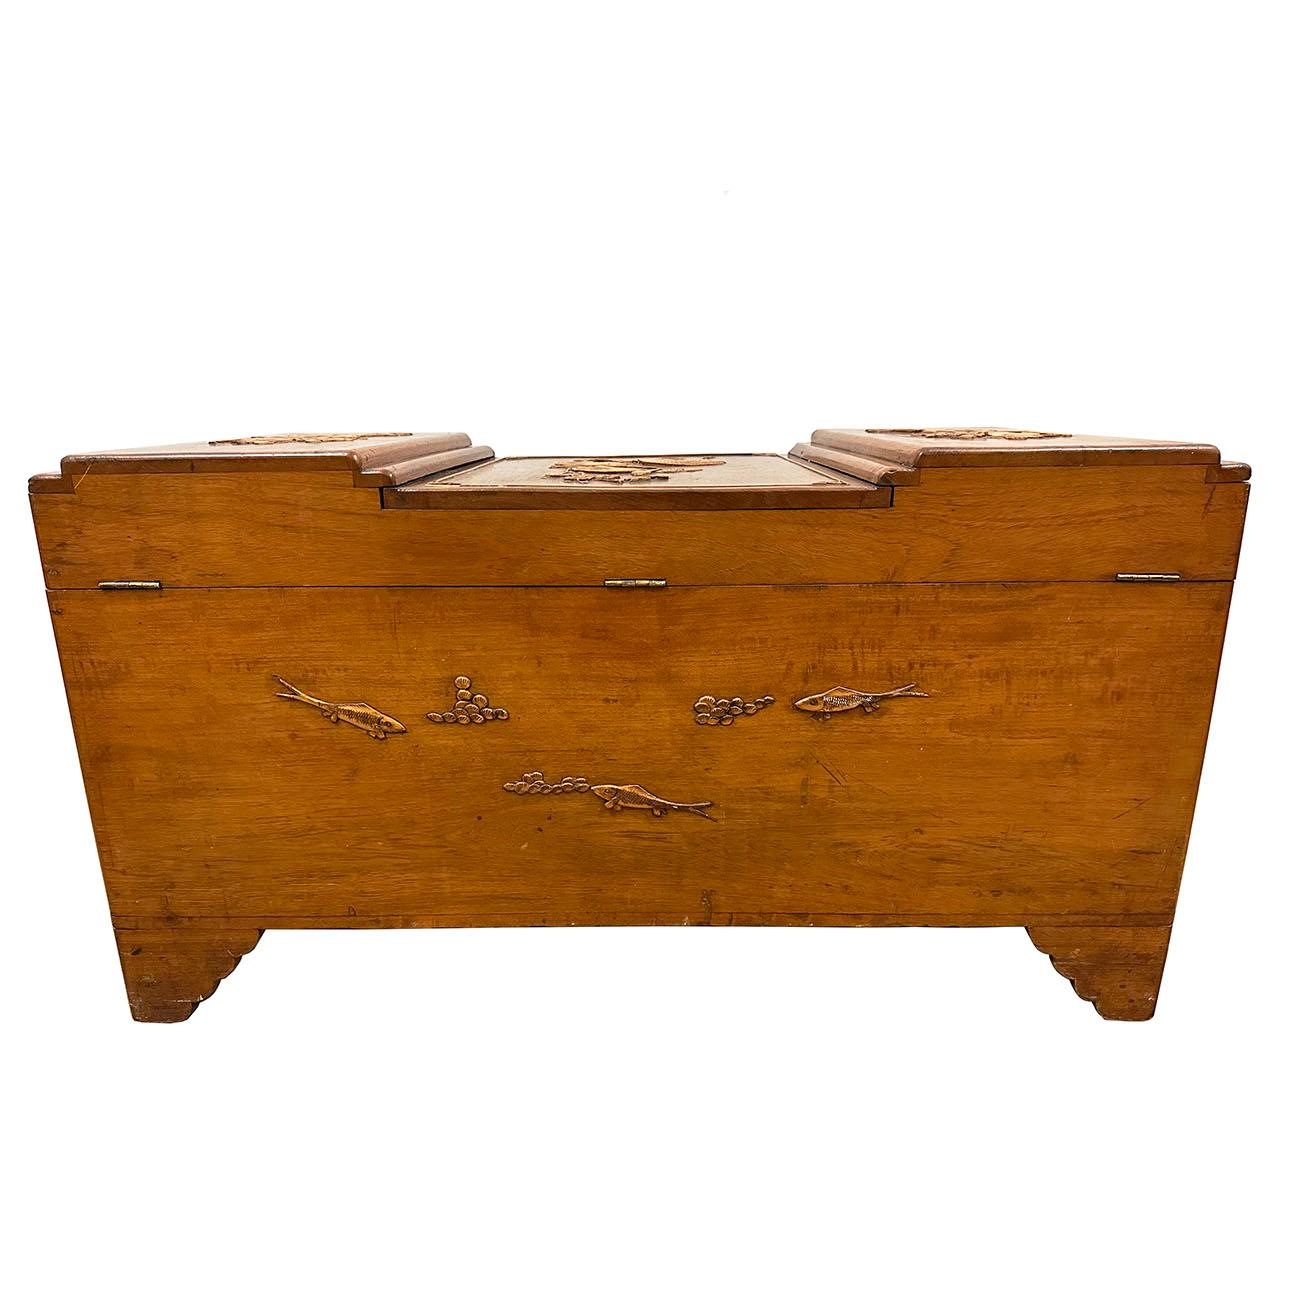 Early 20th Century Chinese Carved Camphor wood Hope Chest For Sale 5